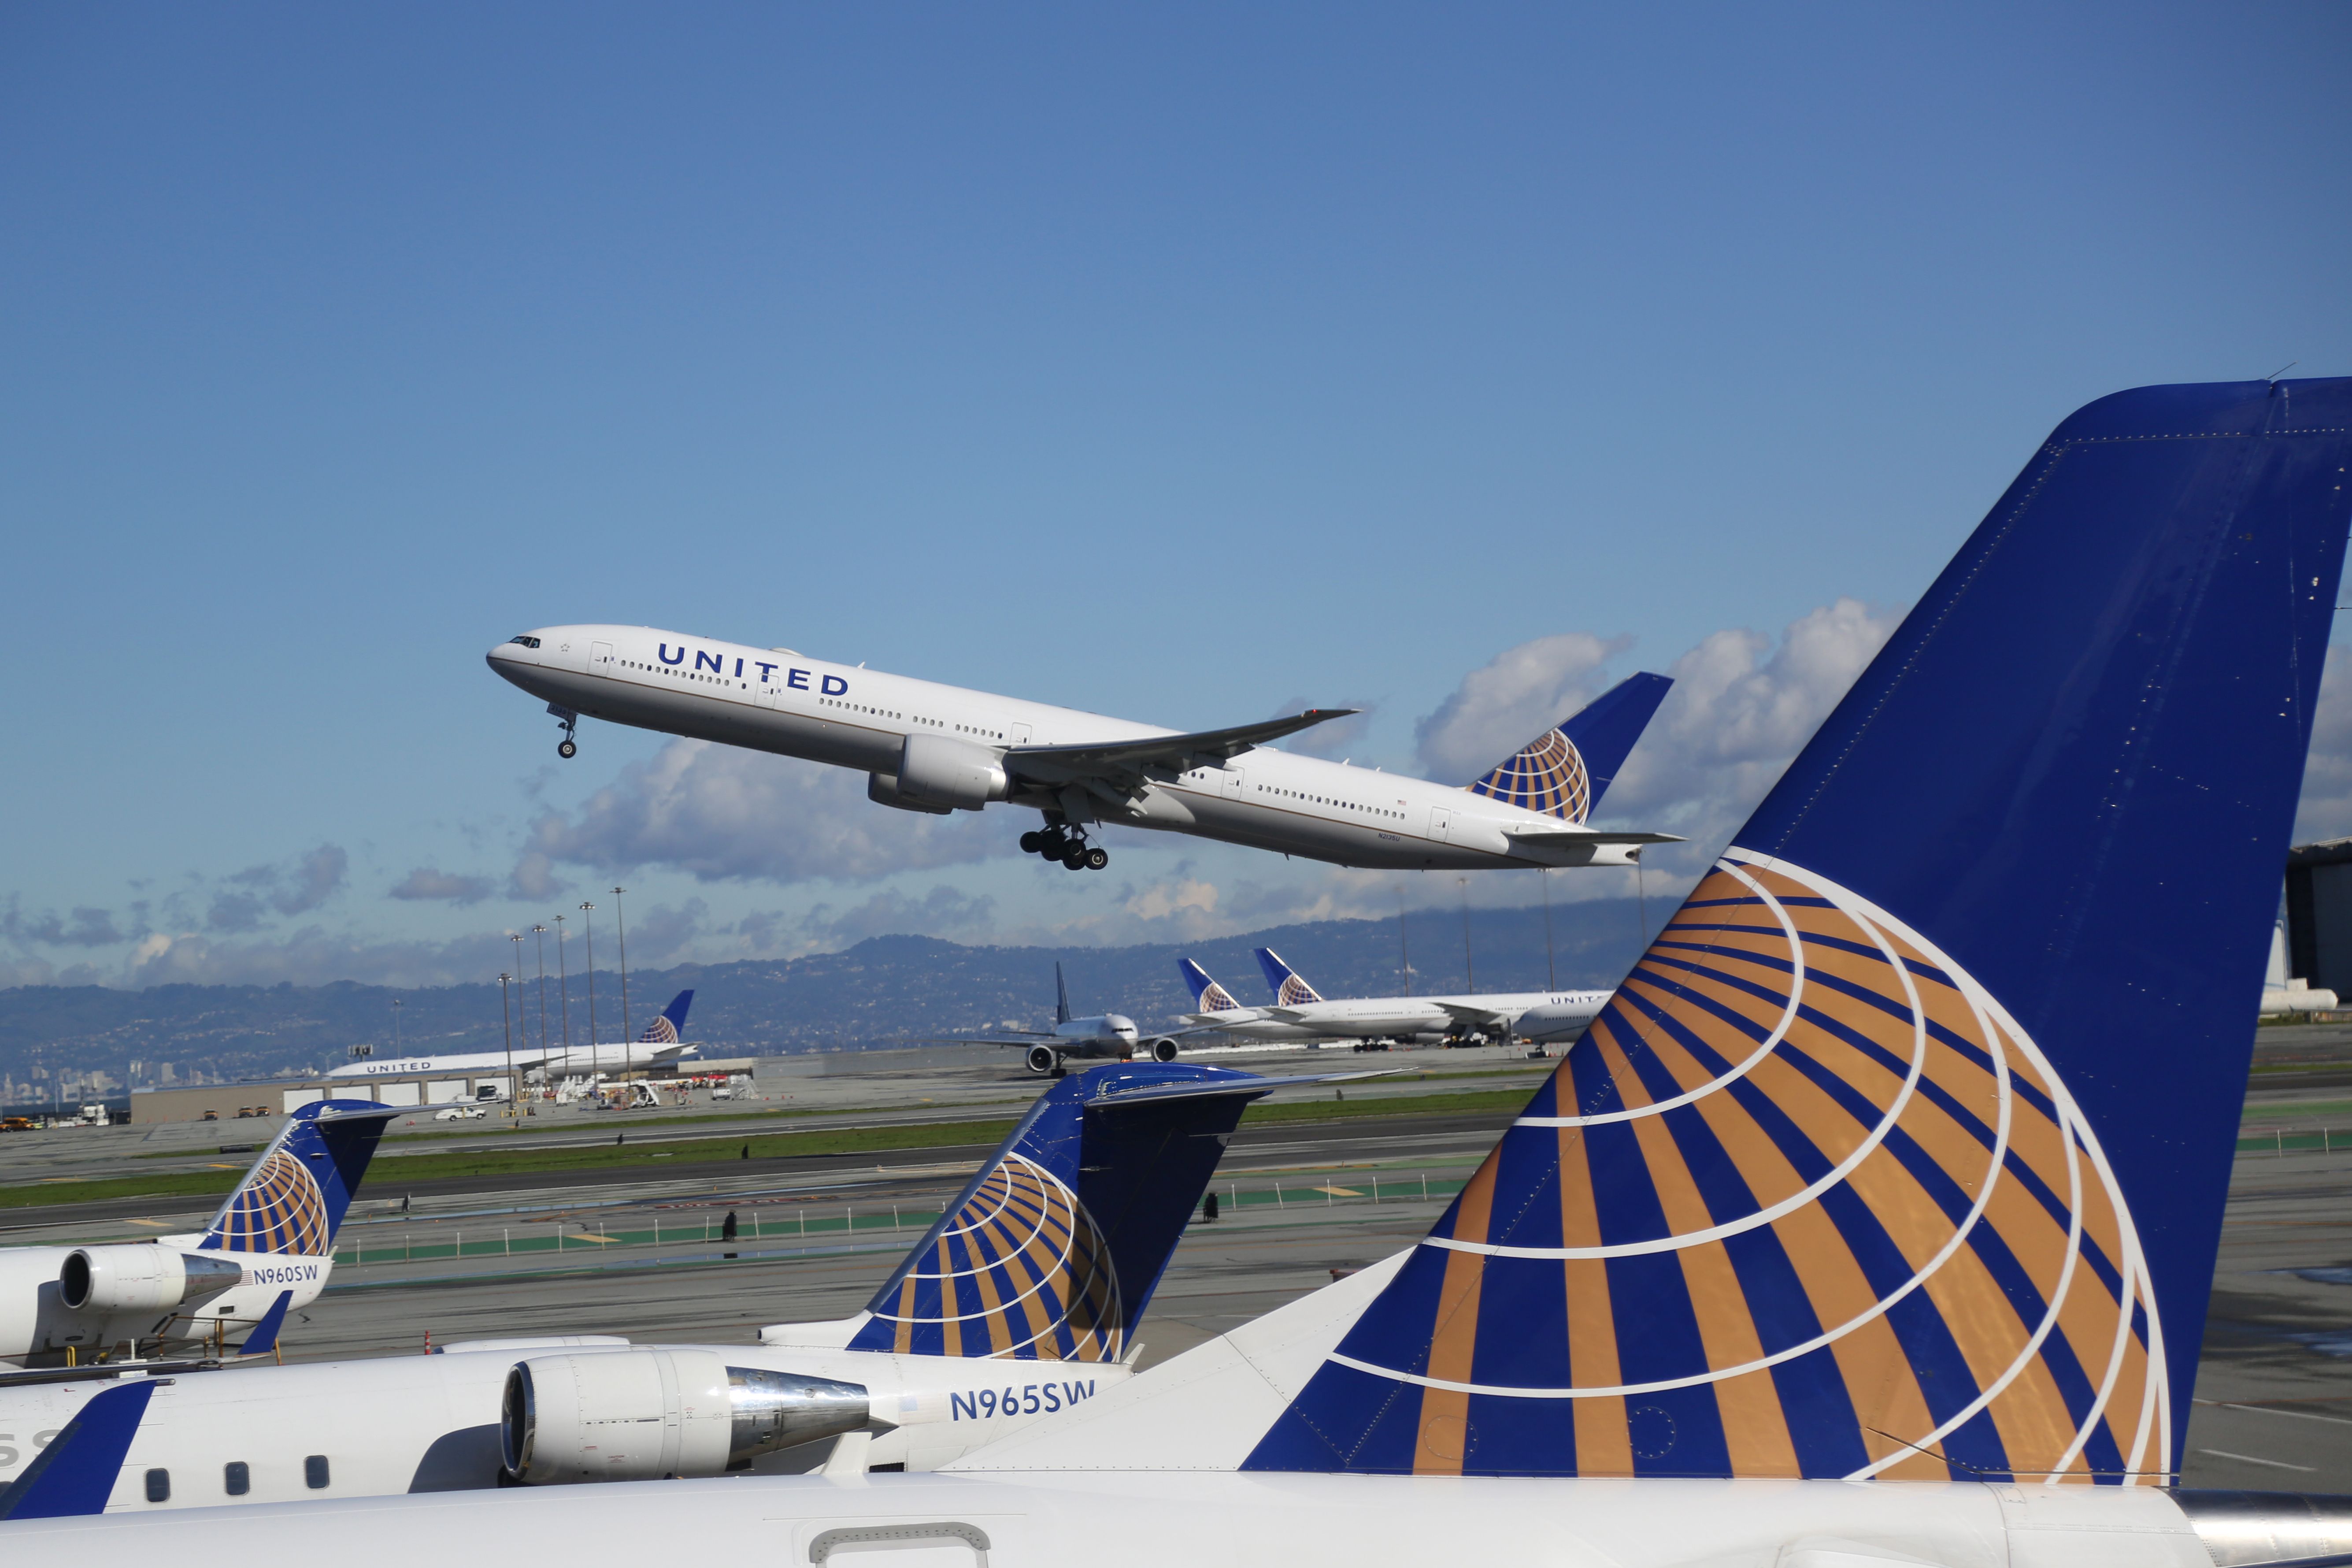 A United Airlines aircraft taking off while several others are parked on the apron.